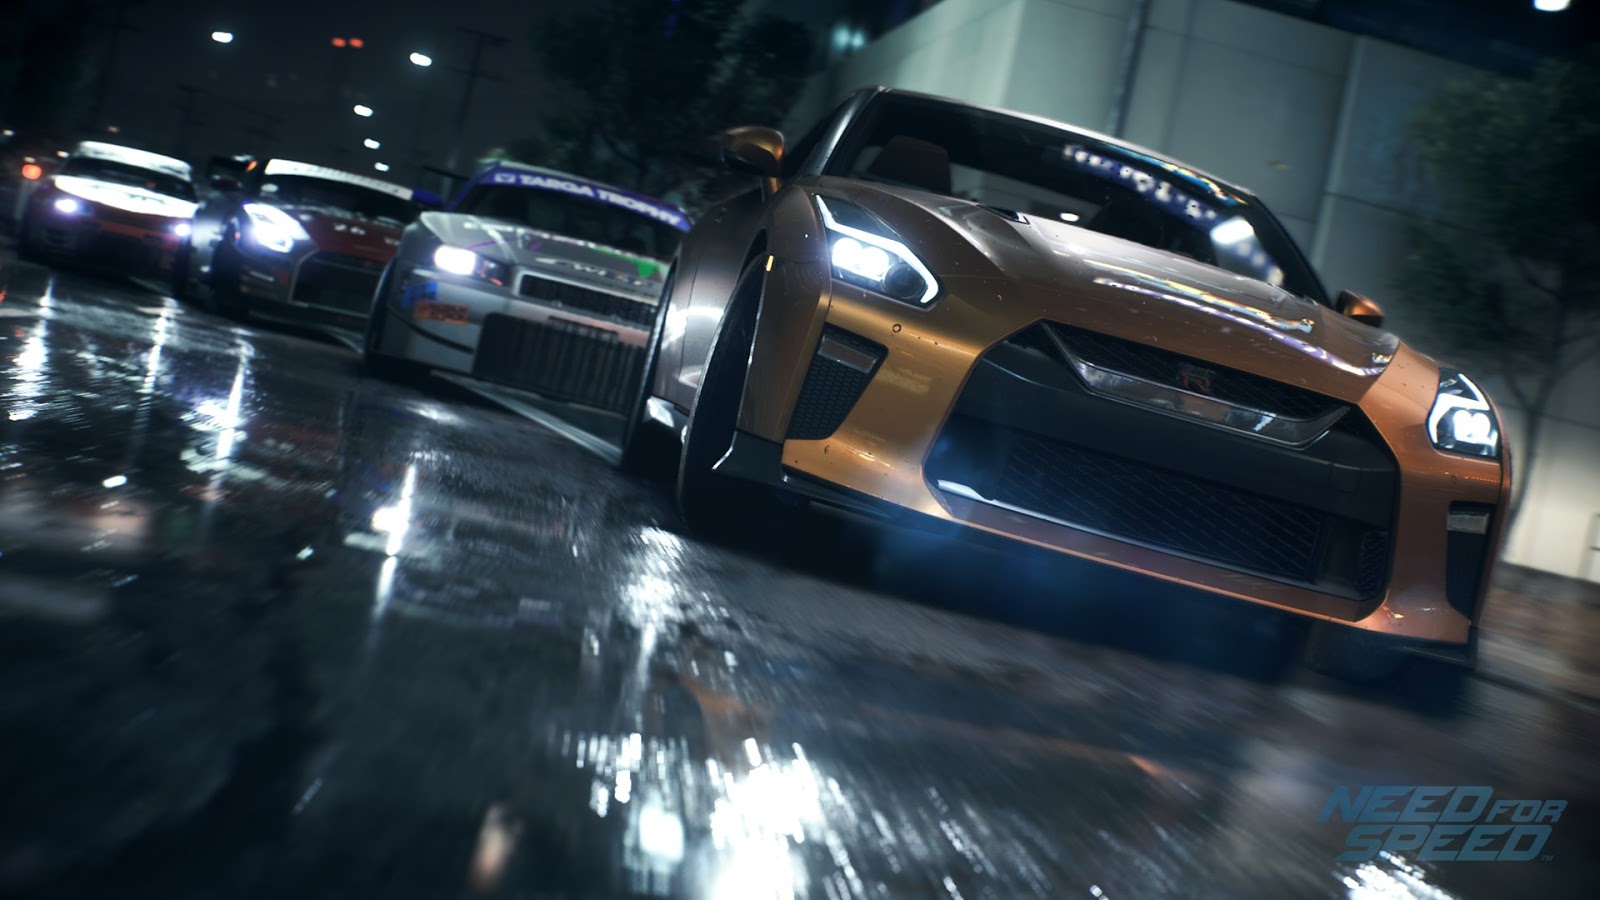 Need For Speed Underground 3 Pc Setup Free Download